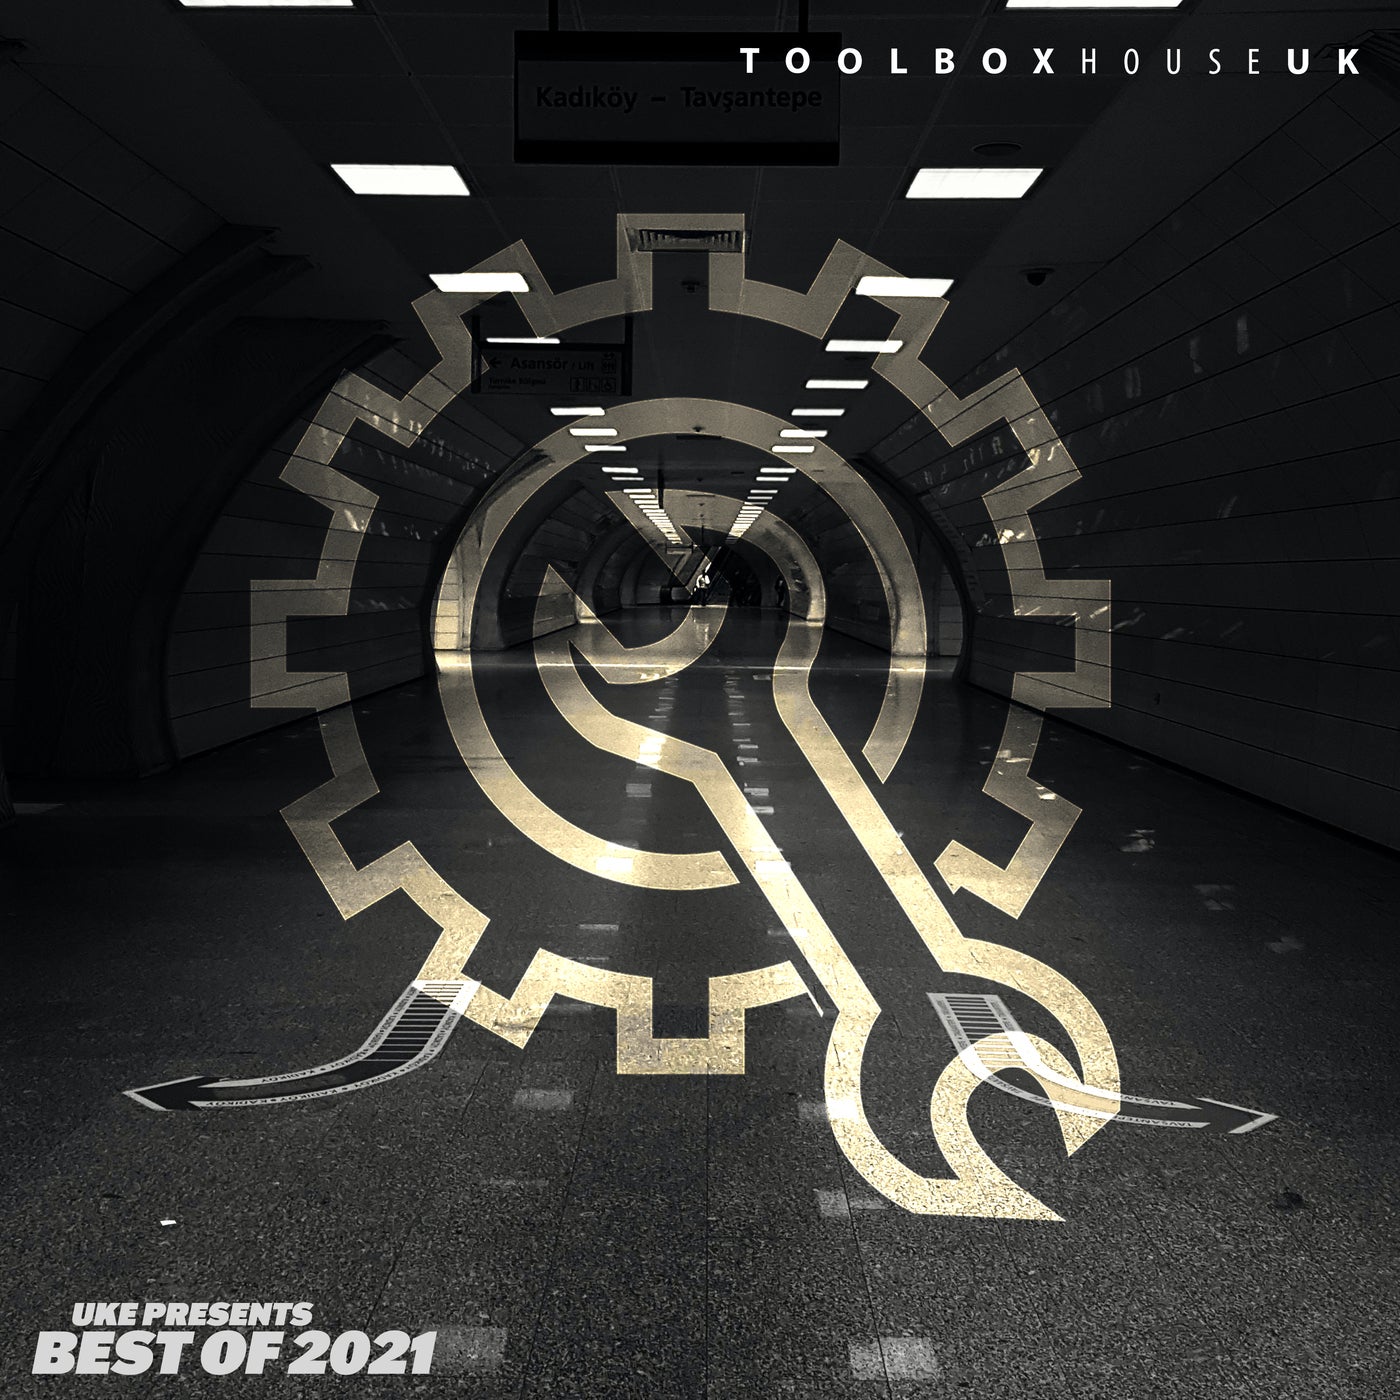 Toolbox House - Best Of 2021